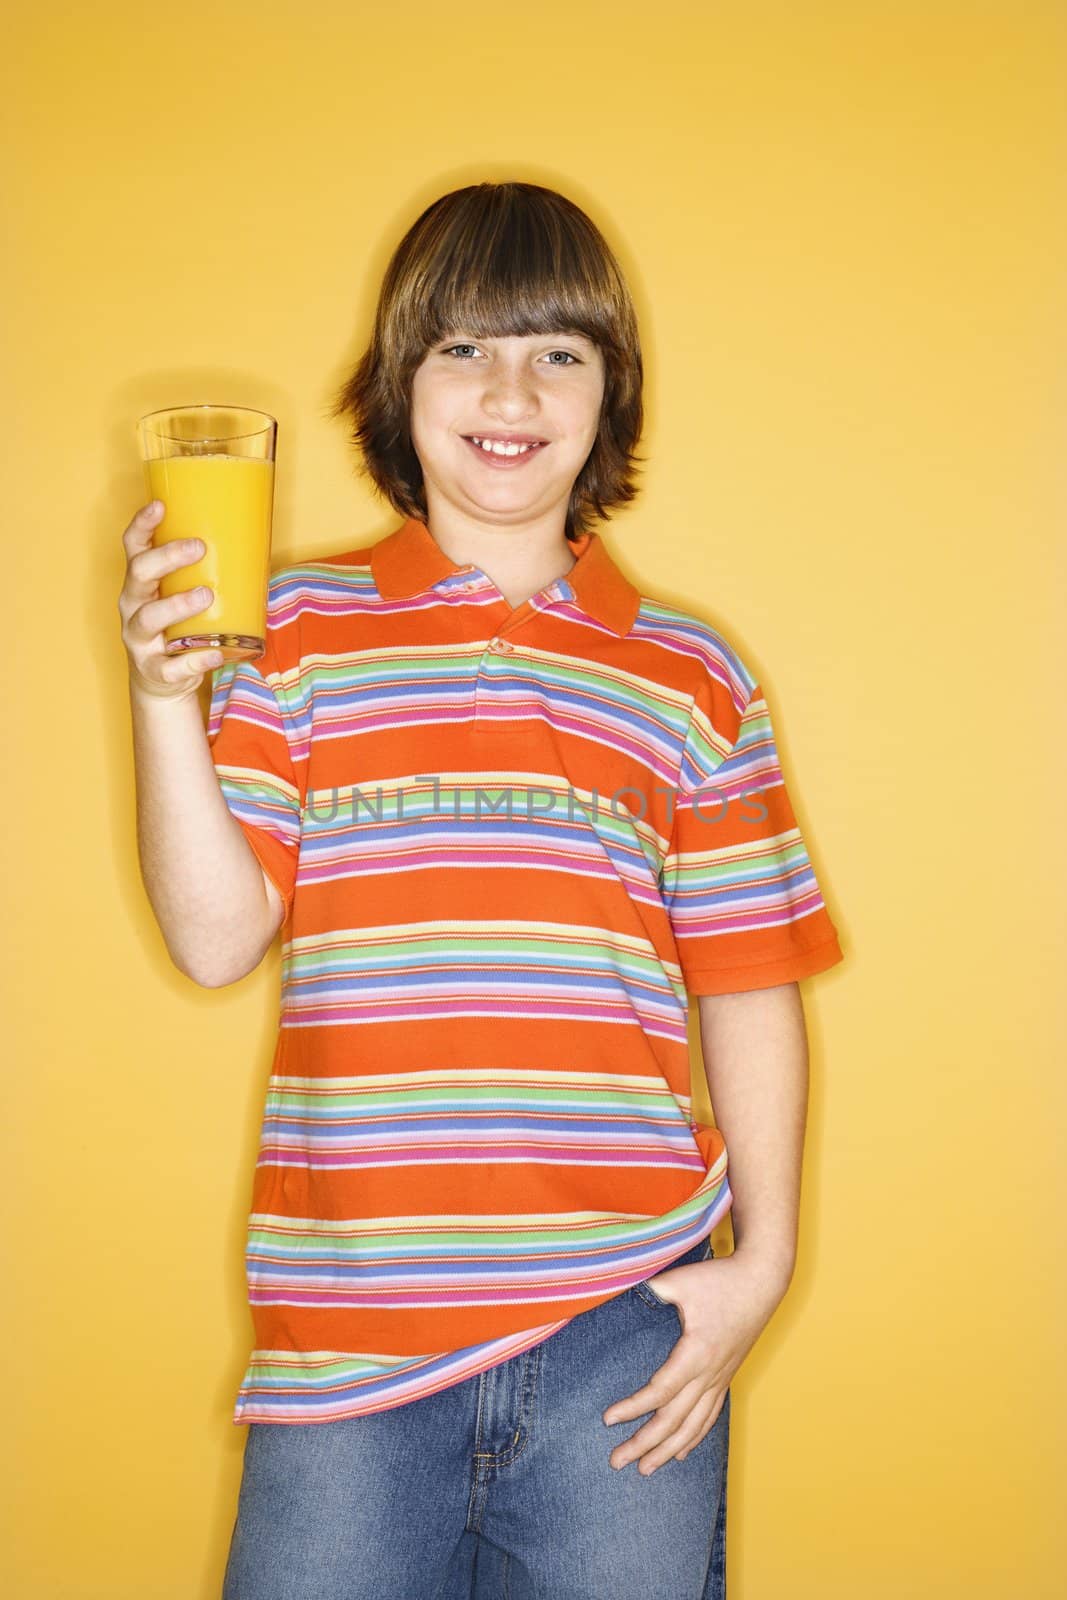 Portrait of smiling Caucasian boy holding glass of orange juice and standing against yellow background.